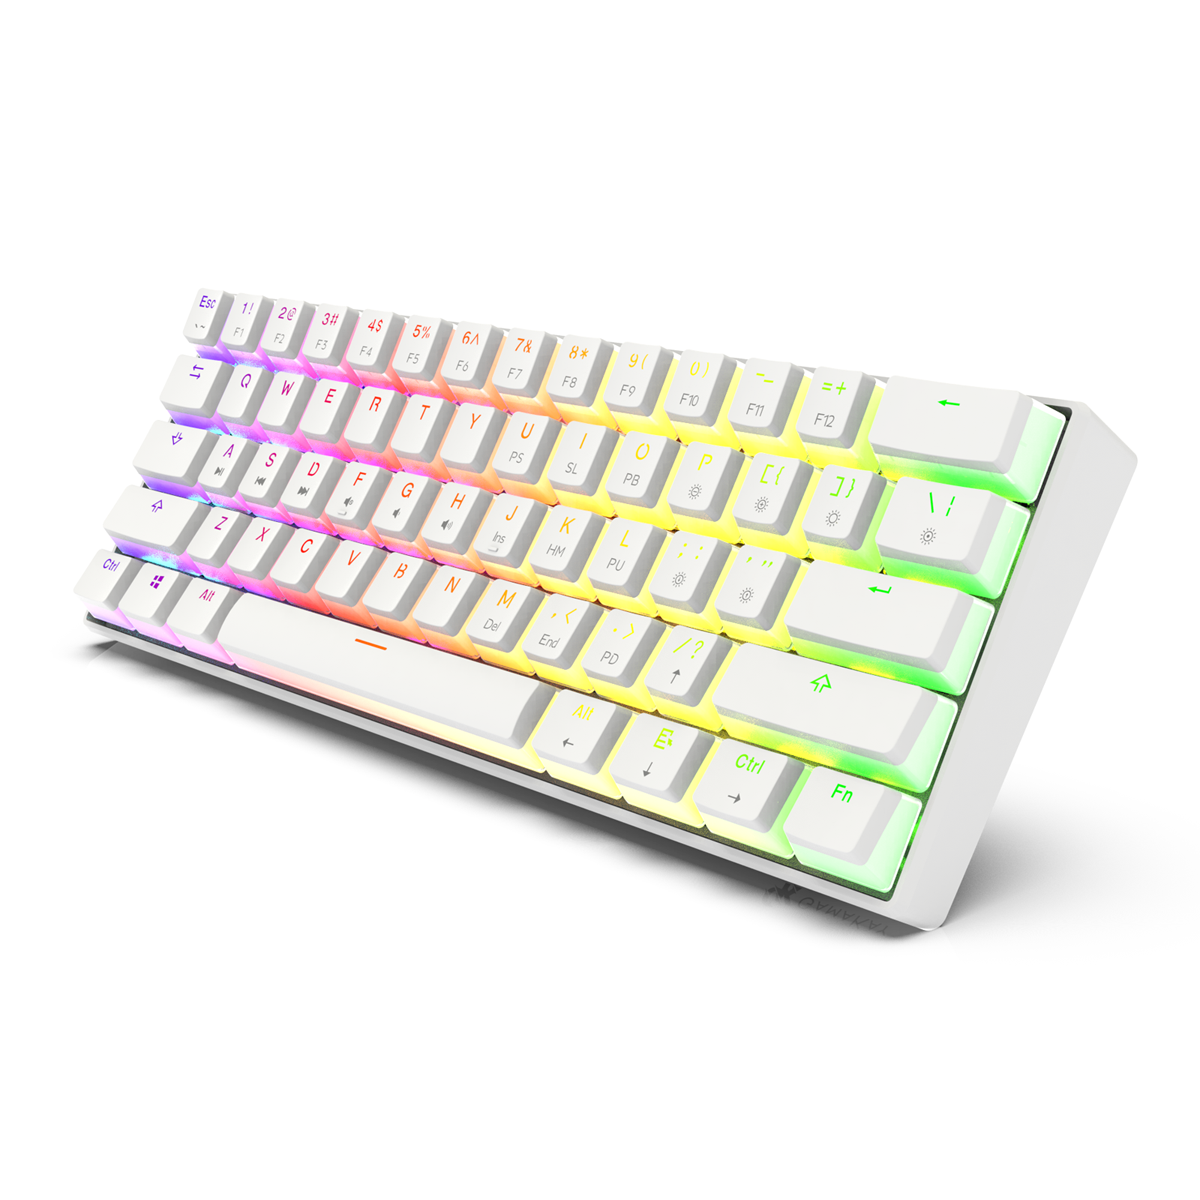 GAMAKAY MK61 Wired Mechanical Keyboard Gateron Optical Switch Pudding Keycaps RGB 61 Keys Hot Swappable Gaming Keyboard New Version